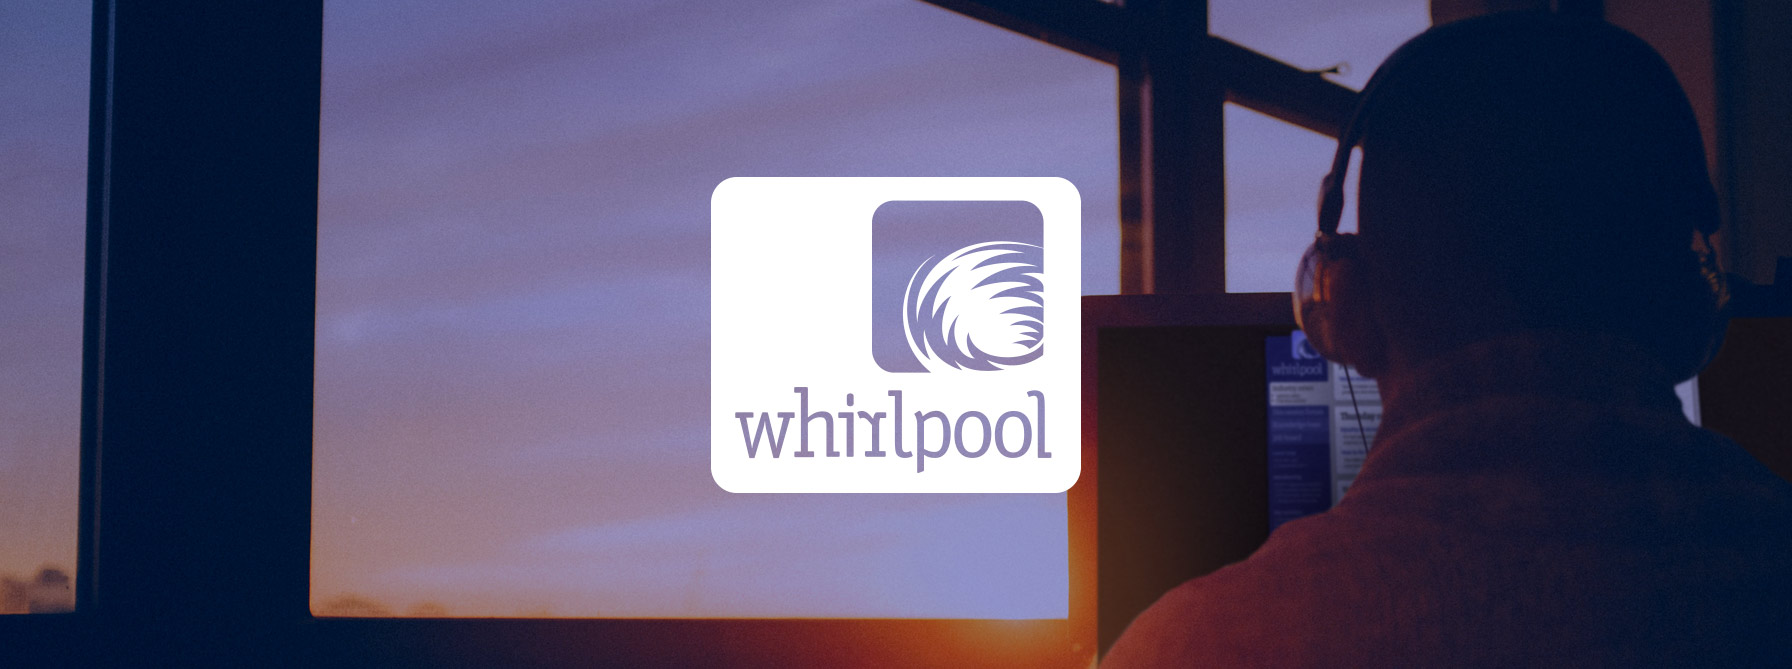 Whirlpool forums: should finance brands have a presence?